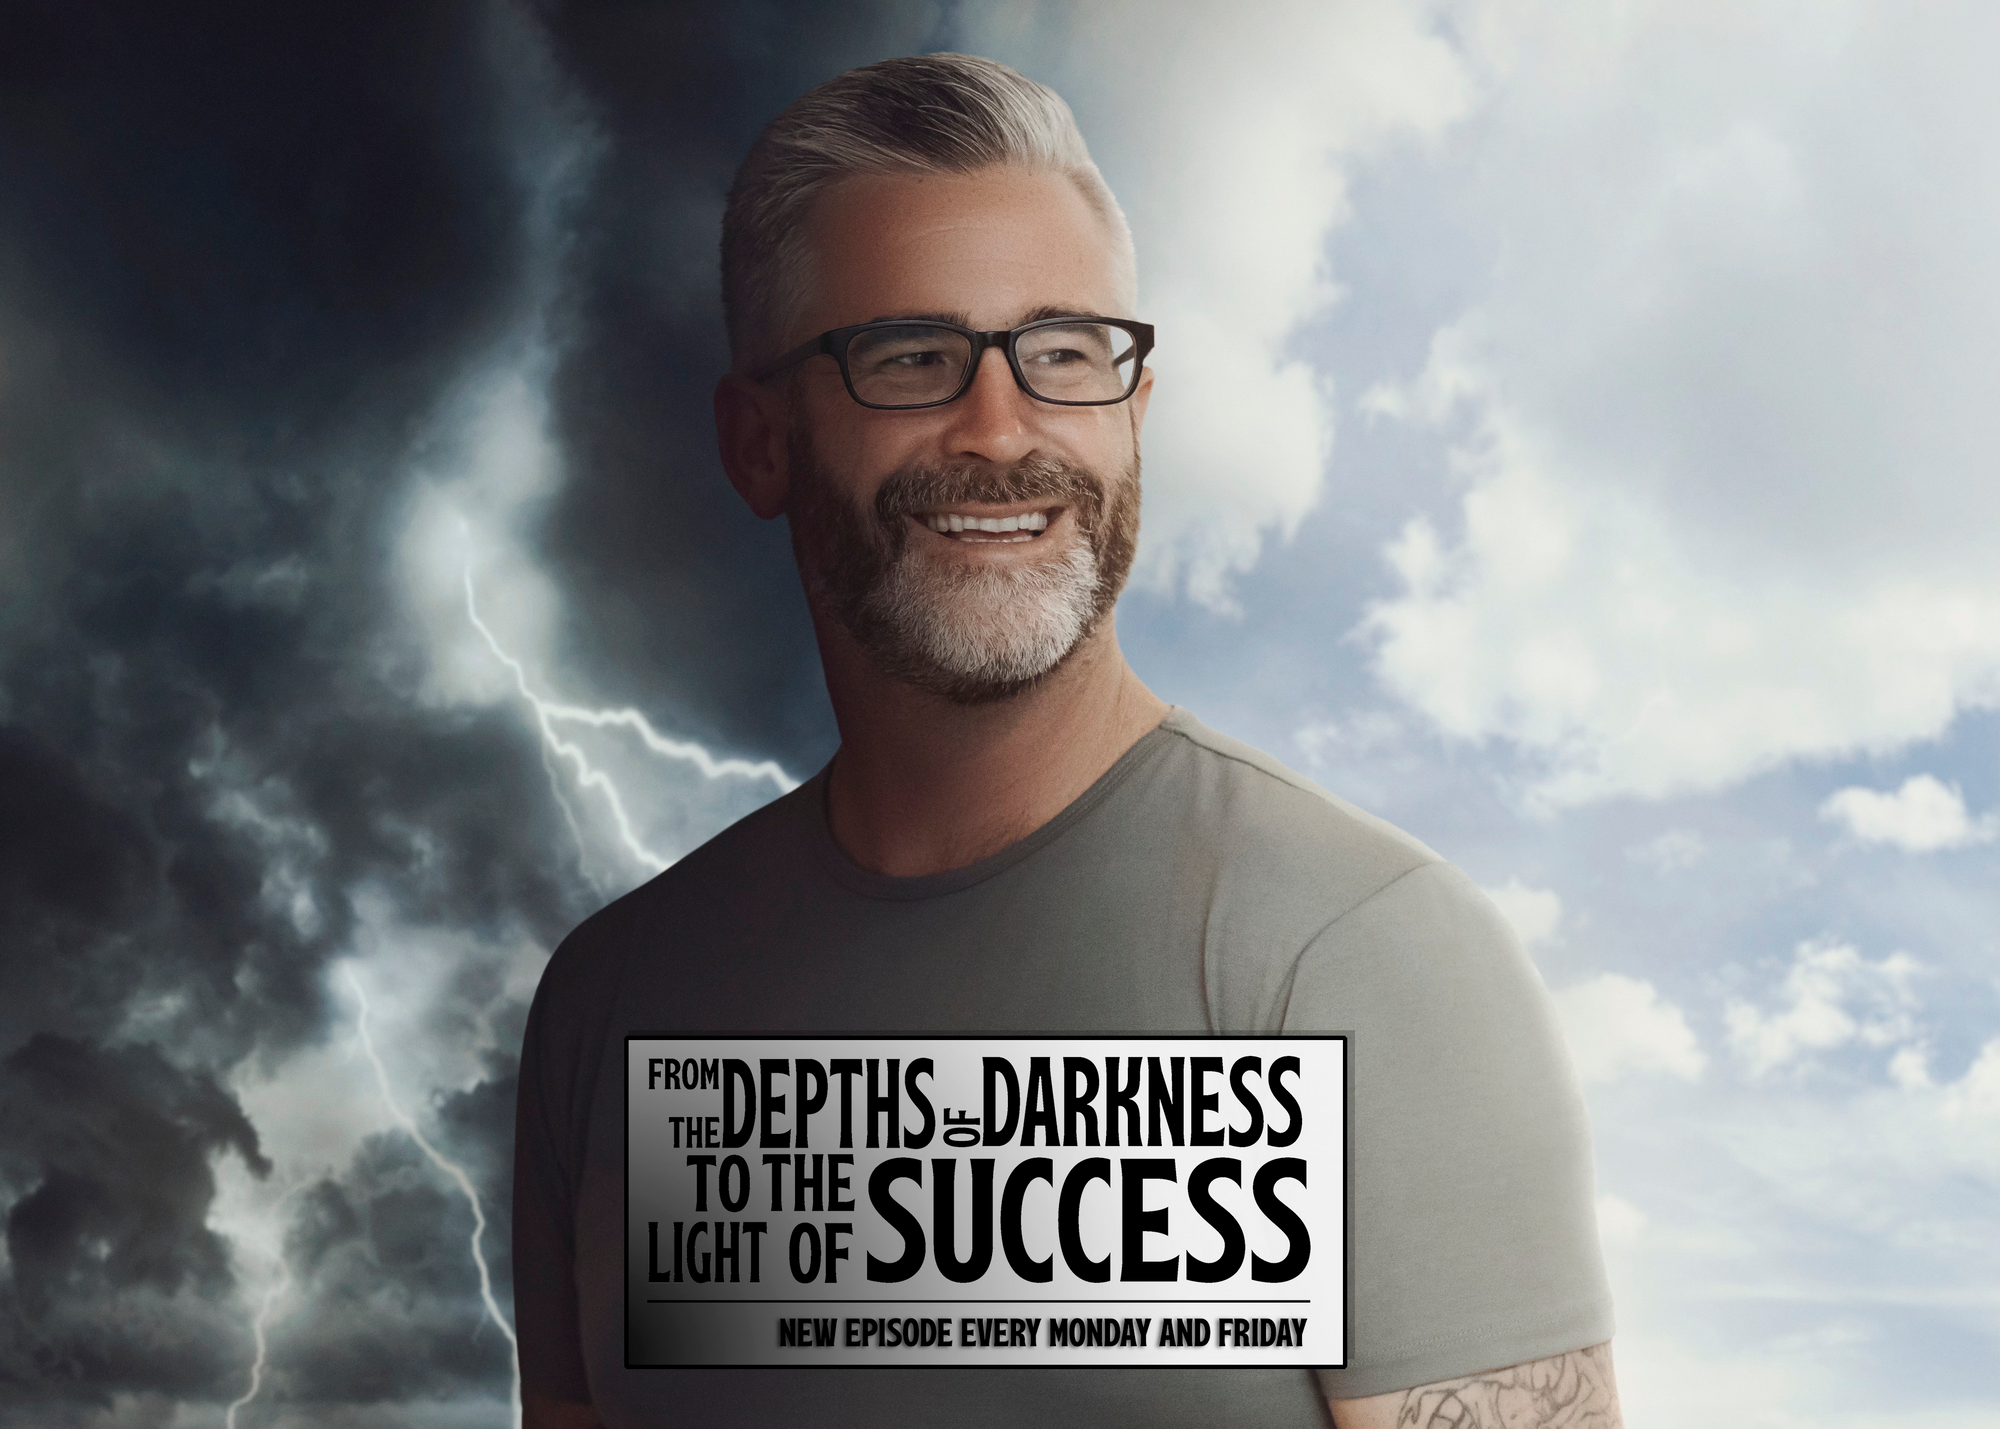 From the Depths of Darkness to the Light of Success - Chris Swiech